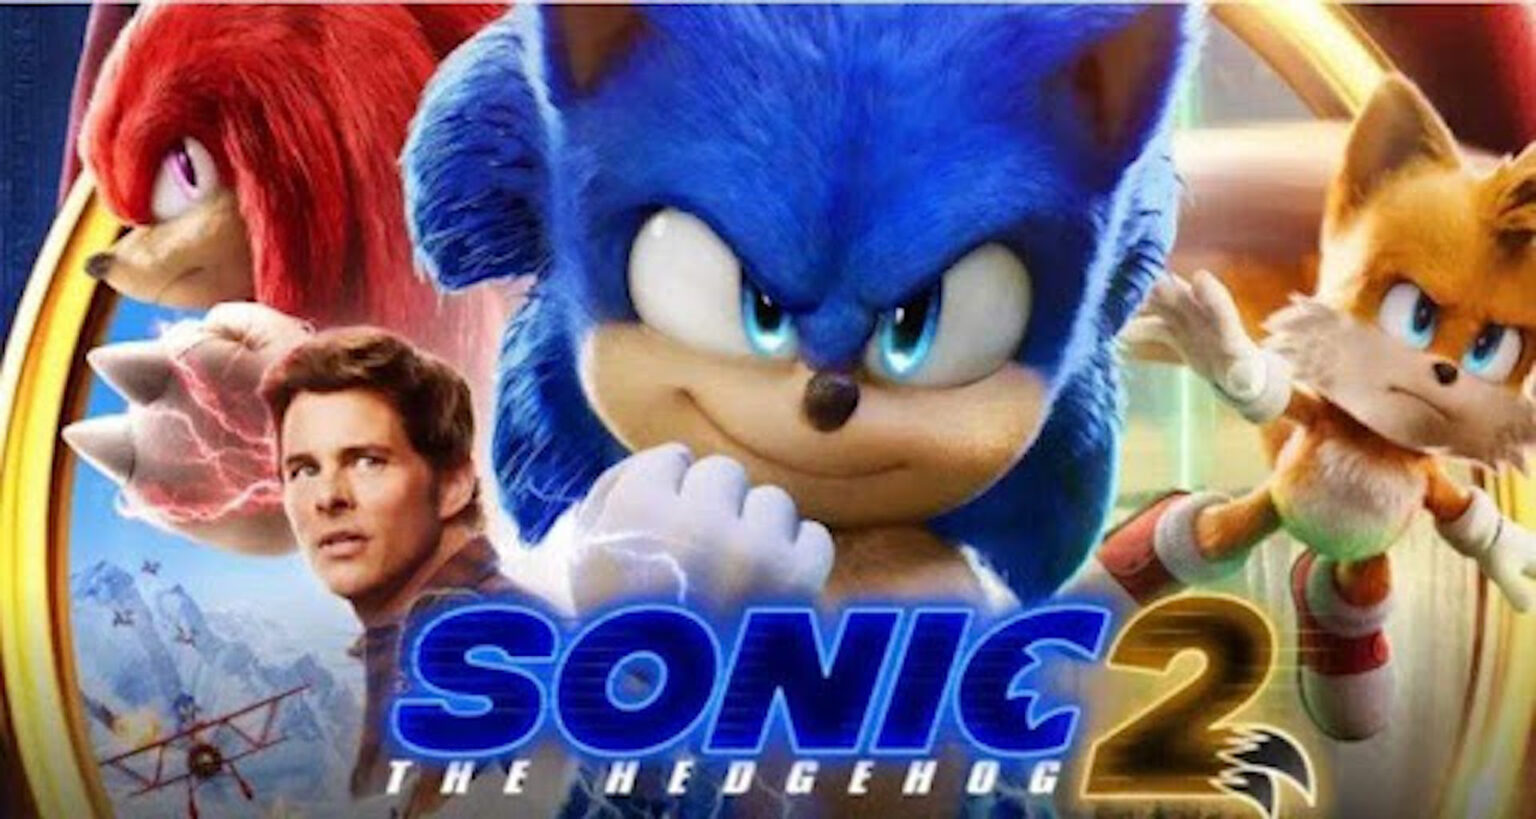 "Sonic the Hedgehog 2" is finally here. Find out where to stream anticipated Jim Carrey Adventure movie sonic 2 online for free now from anywhere.